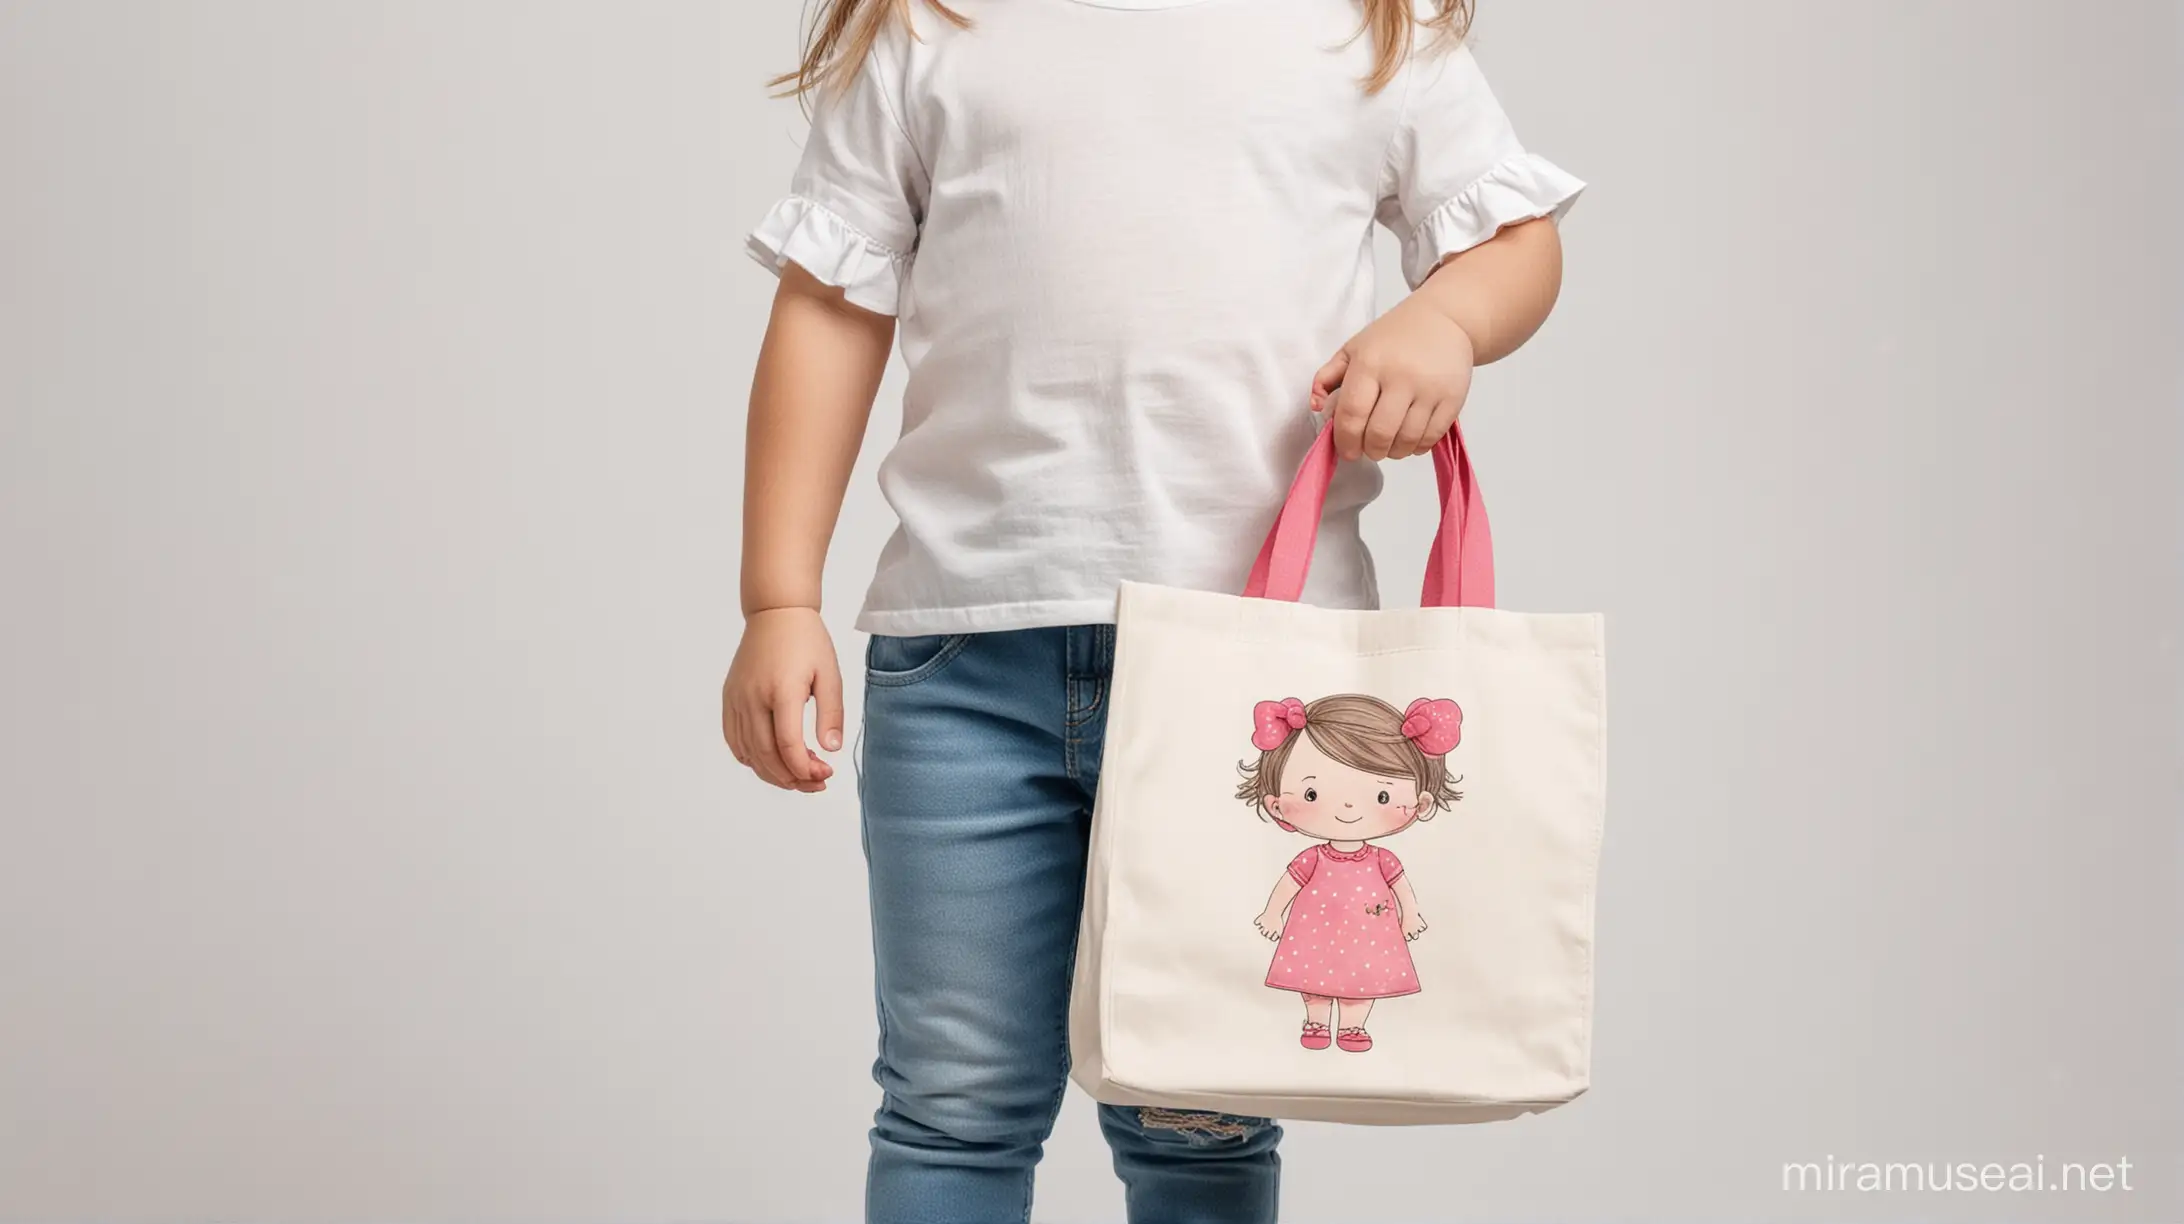 toddler girl holding tote shopping bag  front view 
 white background photo mockup